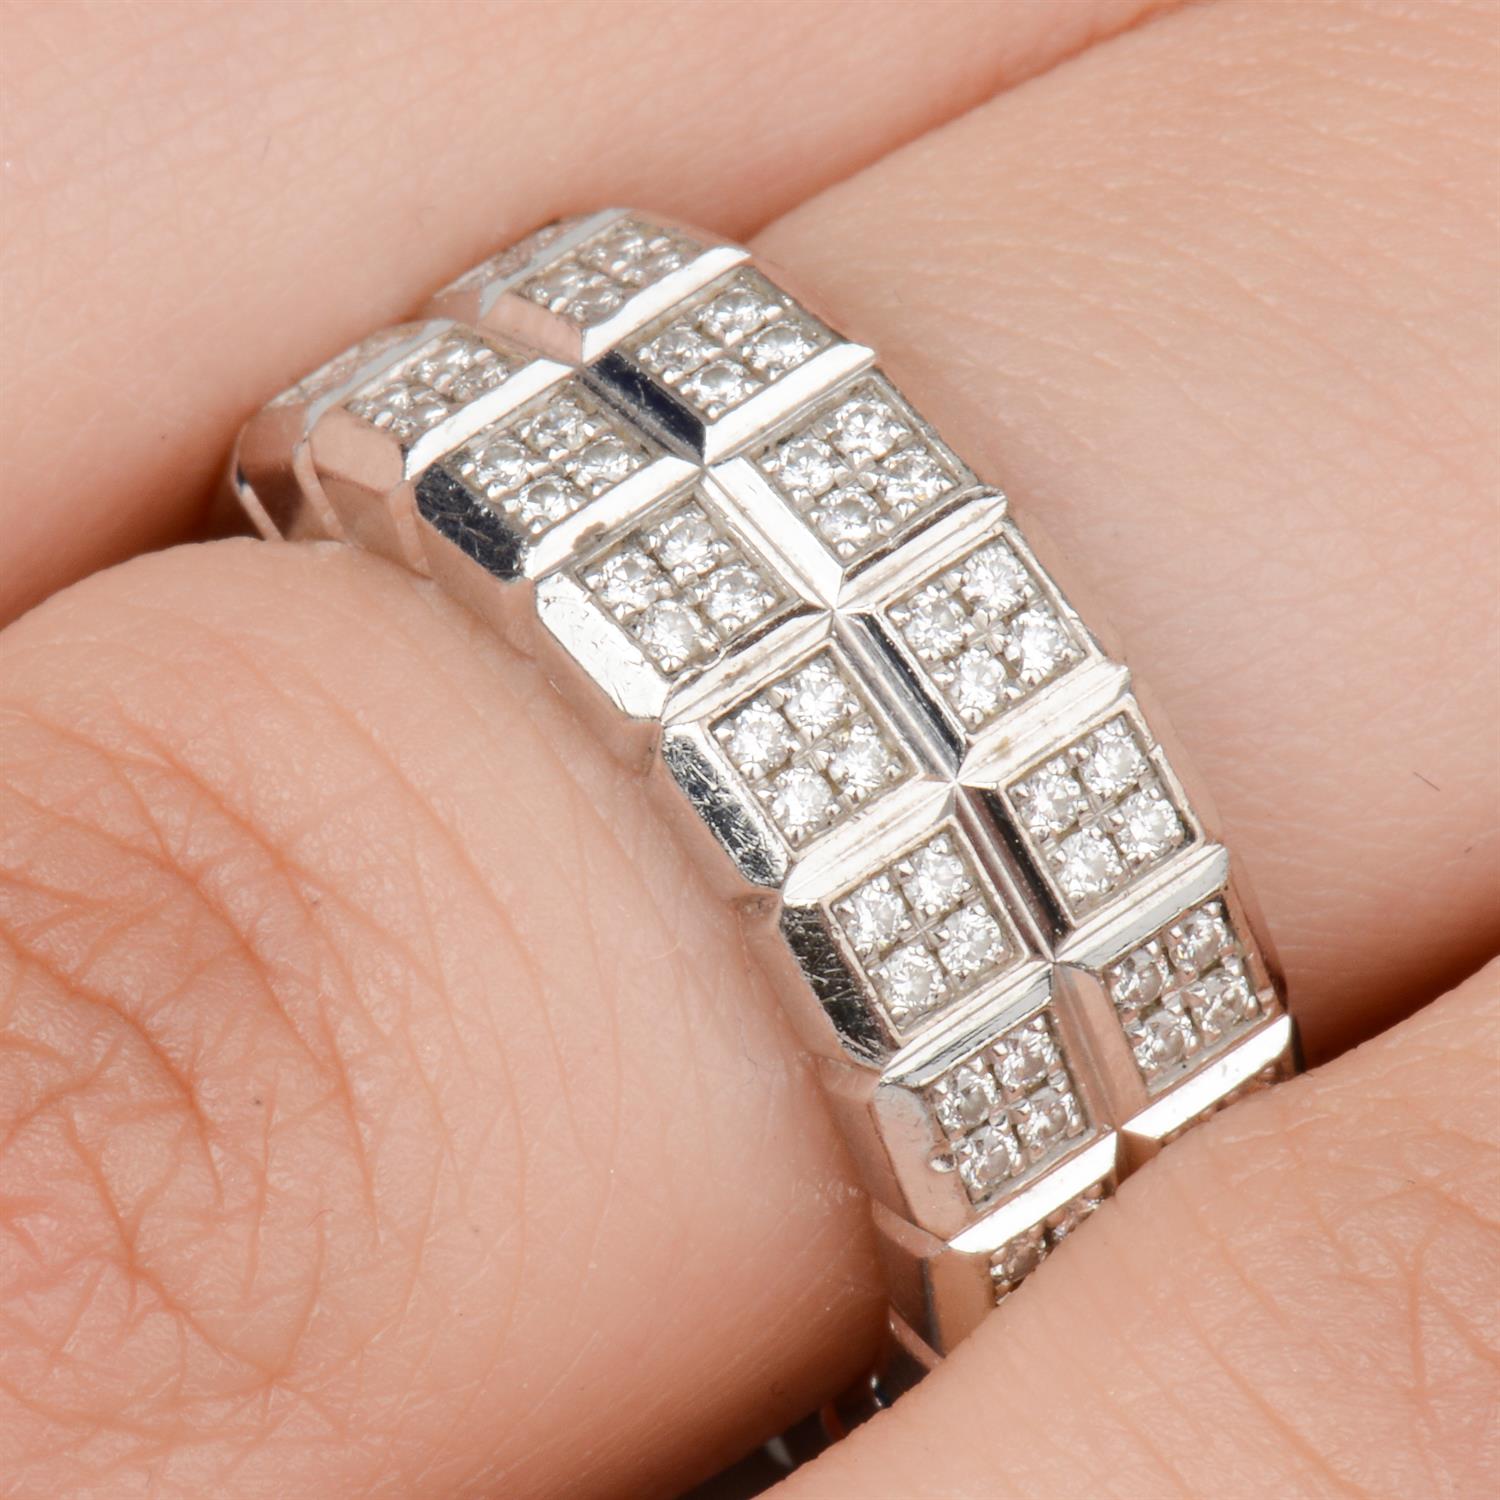 18ct gold diamond 'Ice Cube' ring, by Chopard